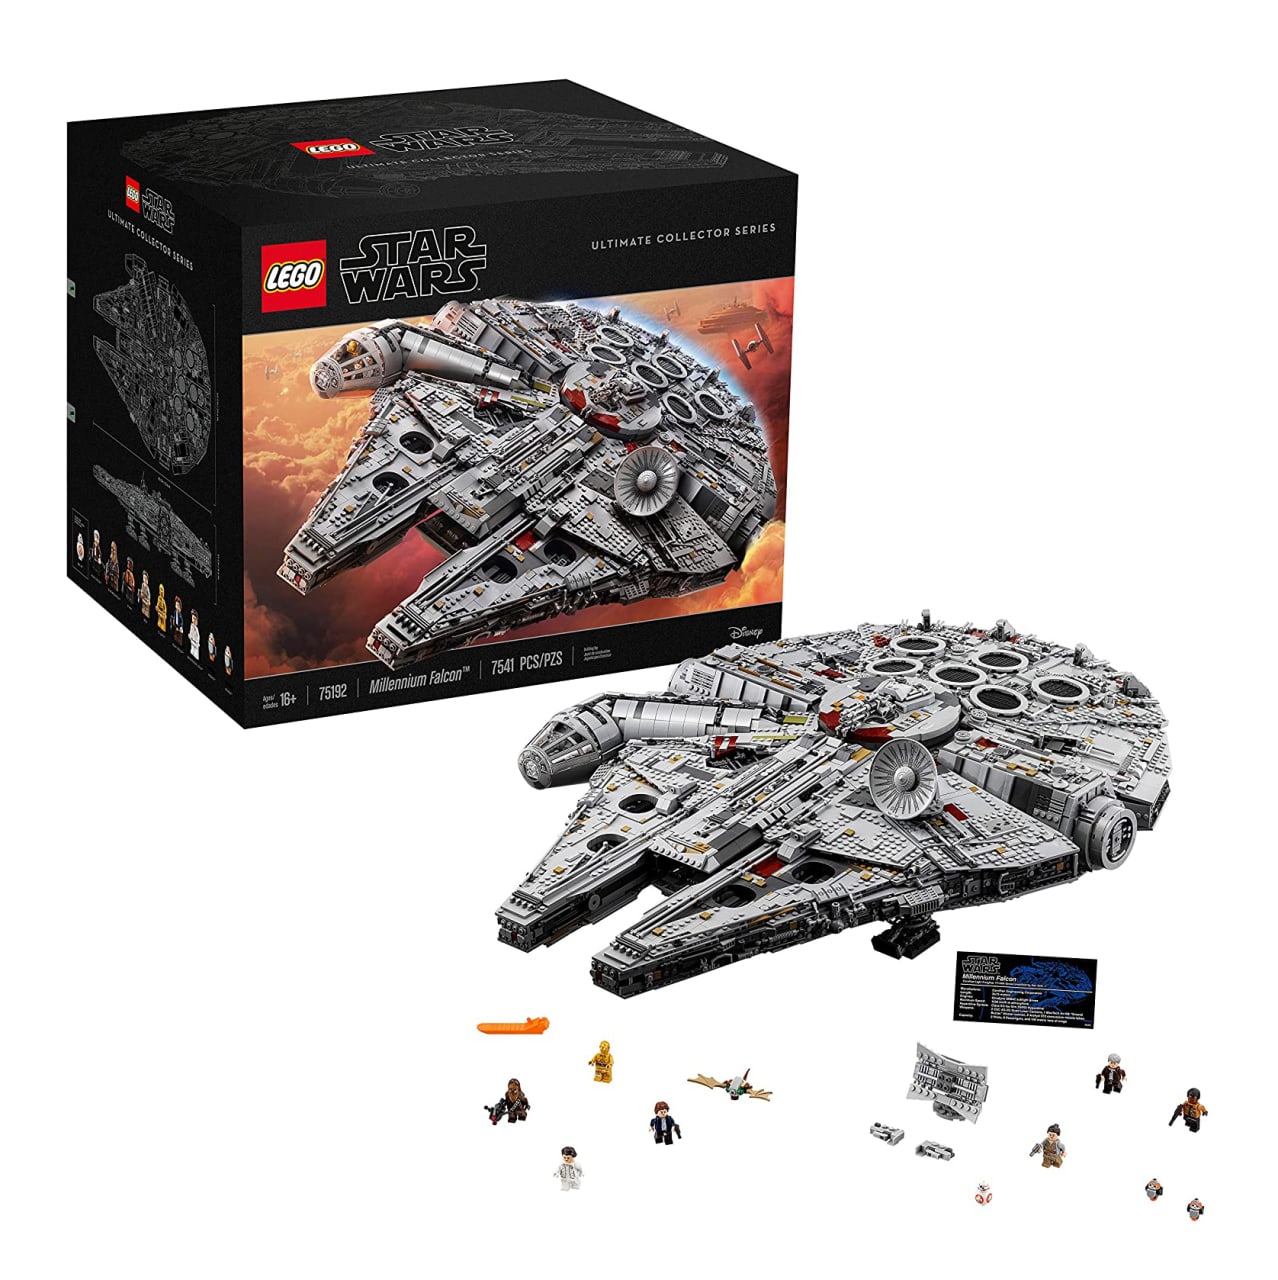 Star Wars Ultimate Millennium Falcon 75192 Expert Building Kit and Starship Model